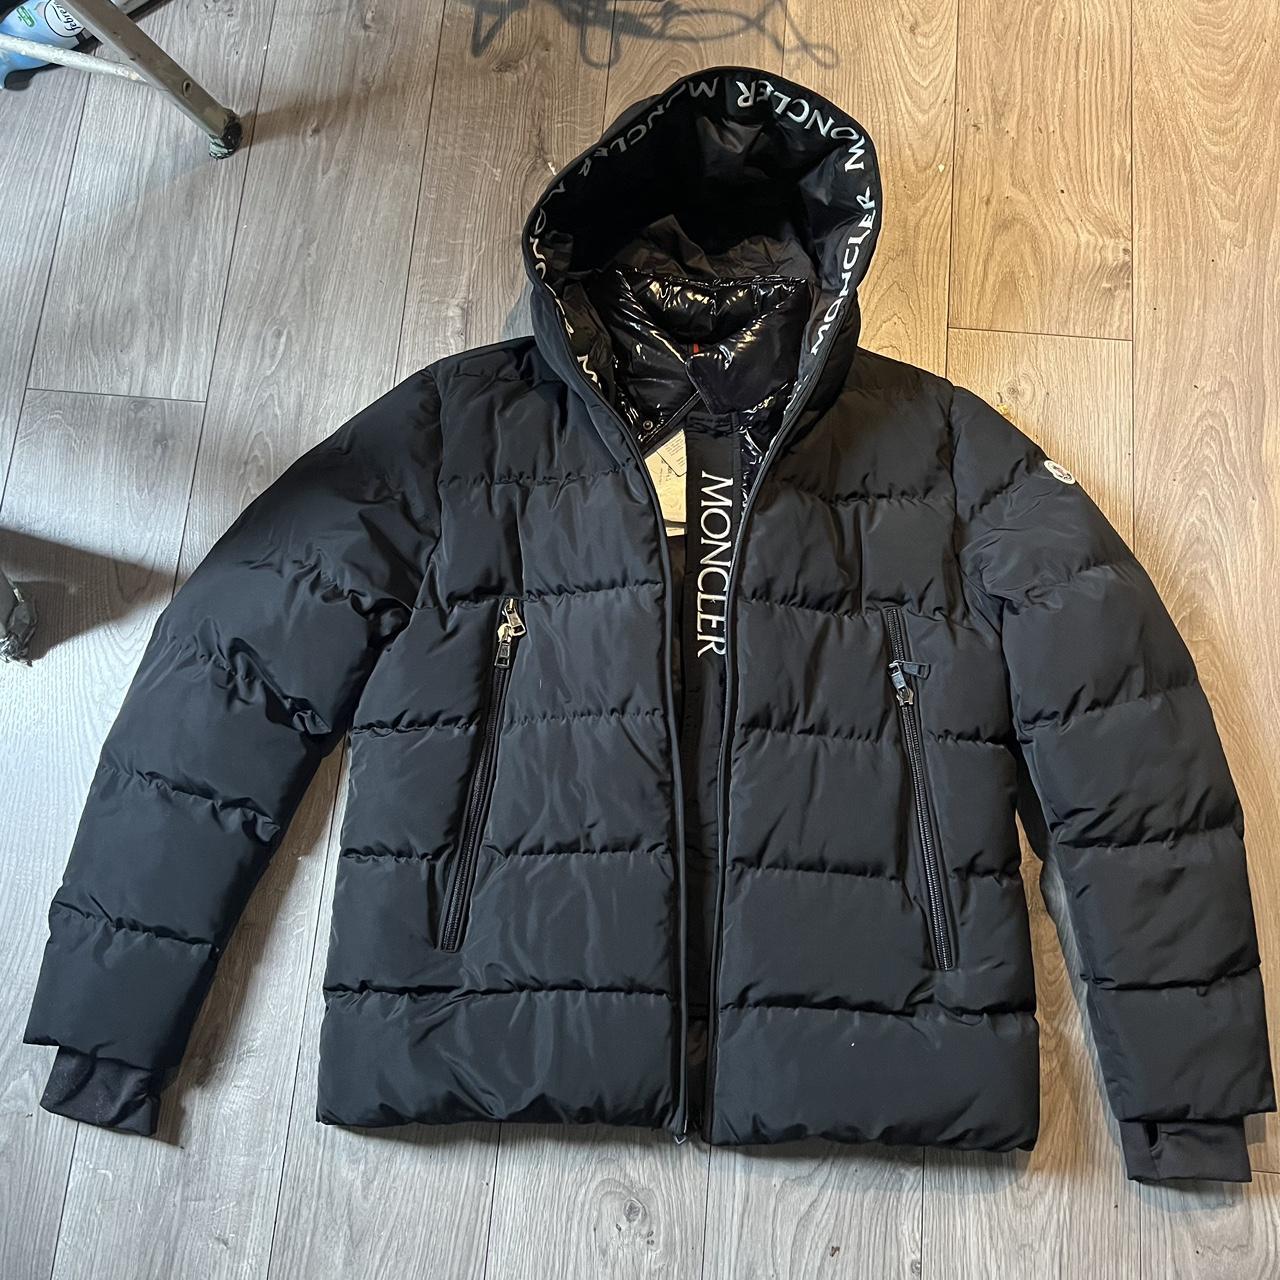 moncler mens coat size 5 brand new, will fit xl-xxl